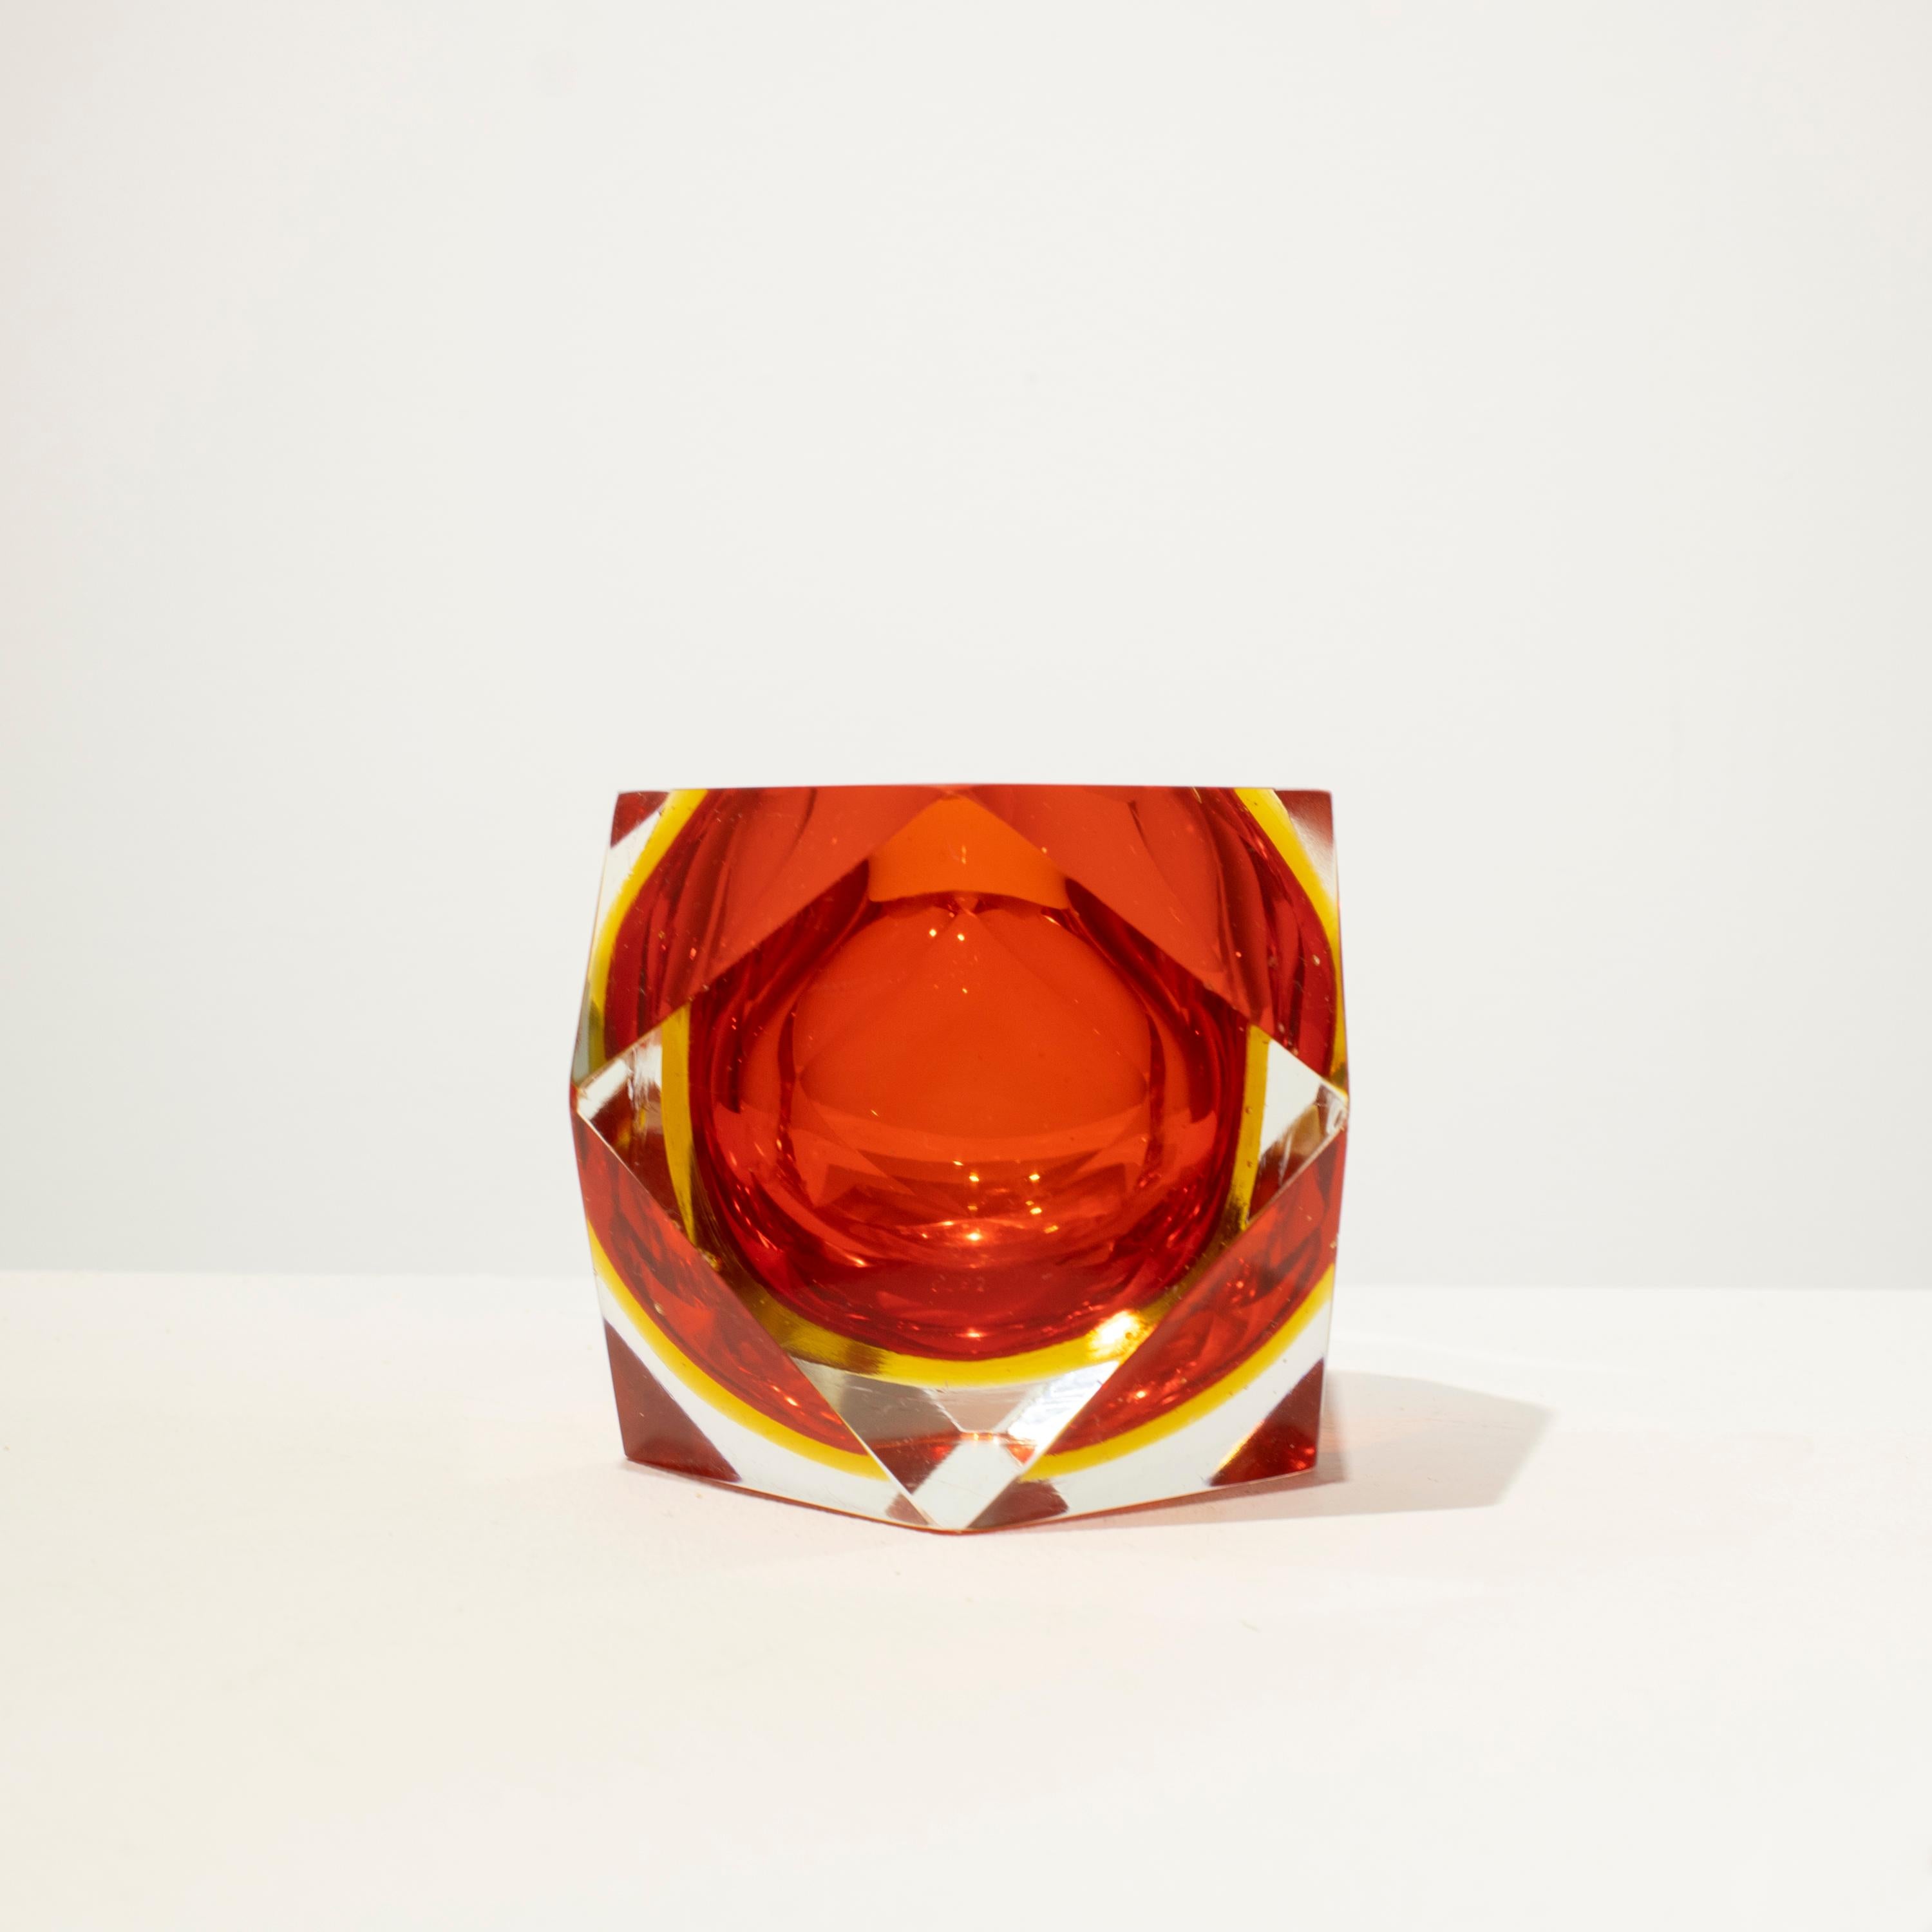 Italian small vase designed by Flavio Poli in the 1970´s. The vase is hand-crafted in faceted Murano glass with a polygonal shape, in different colors with predominant red.